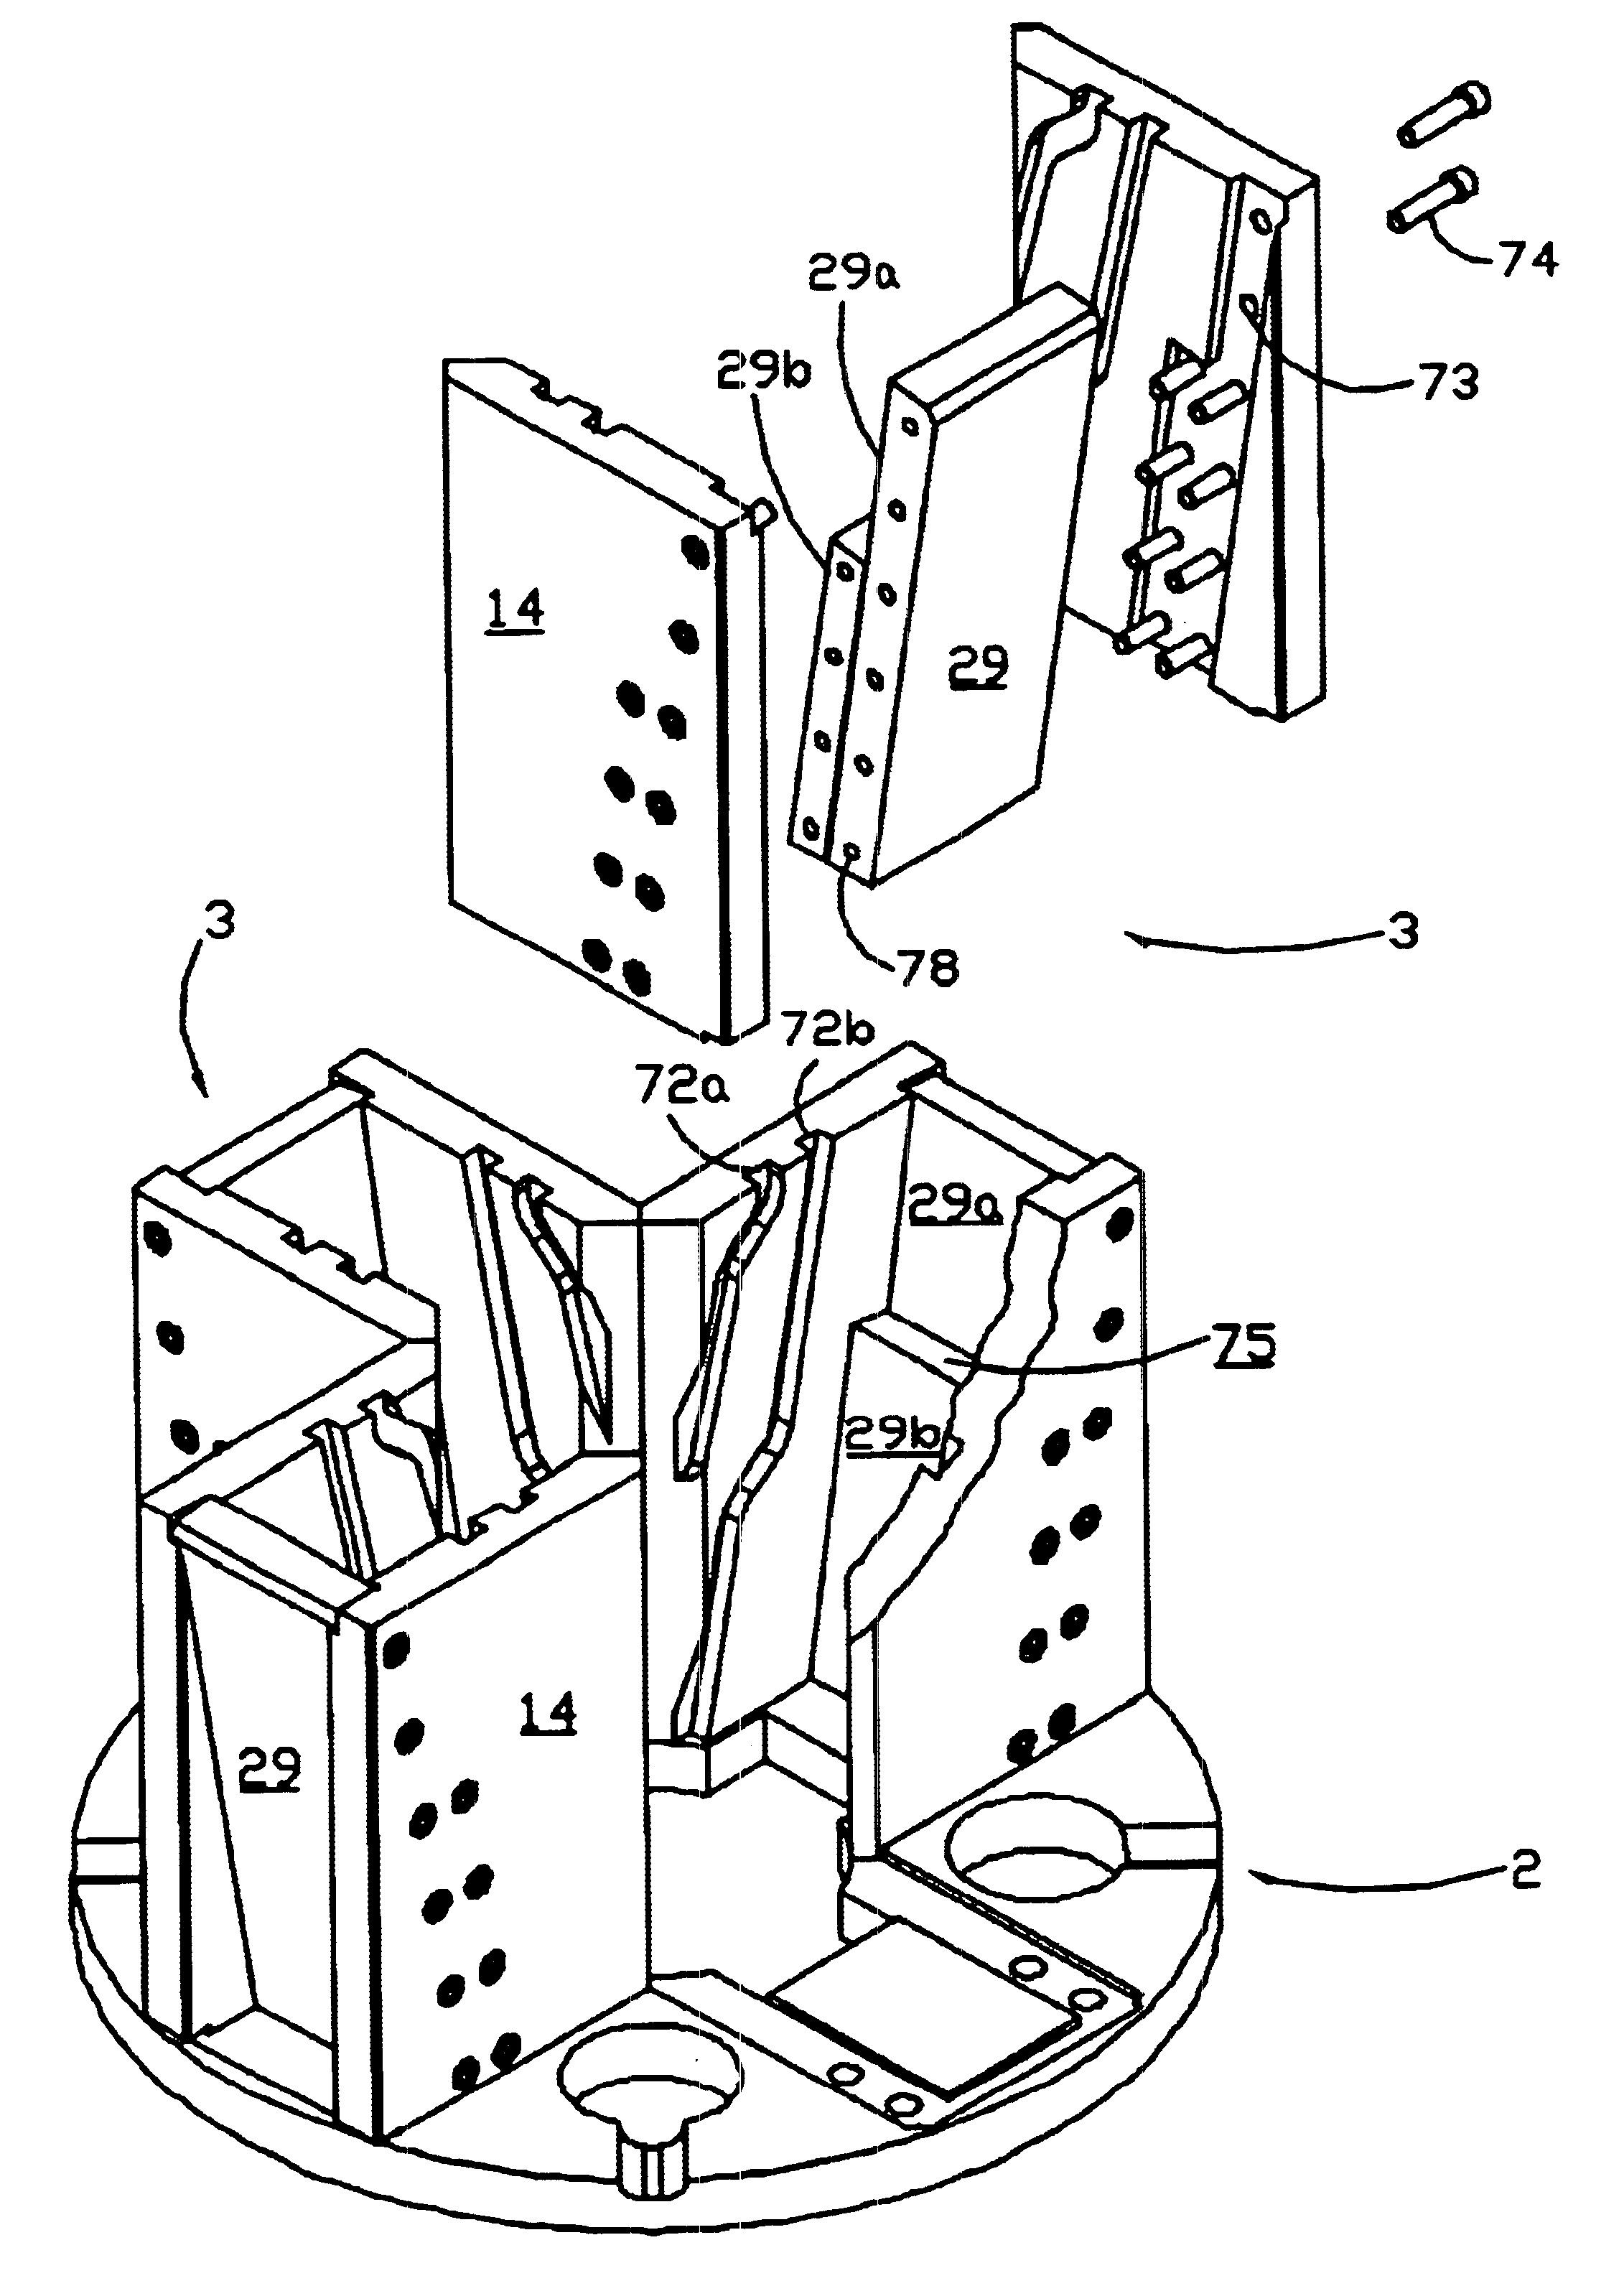 Snubbing unit with improved slip assembly